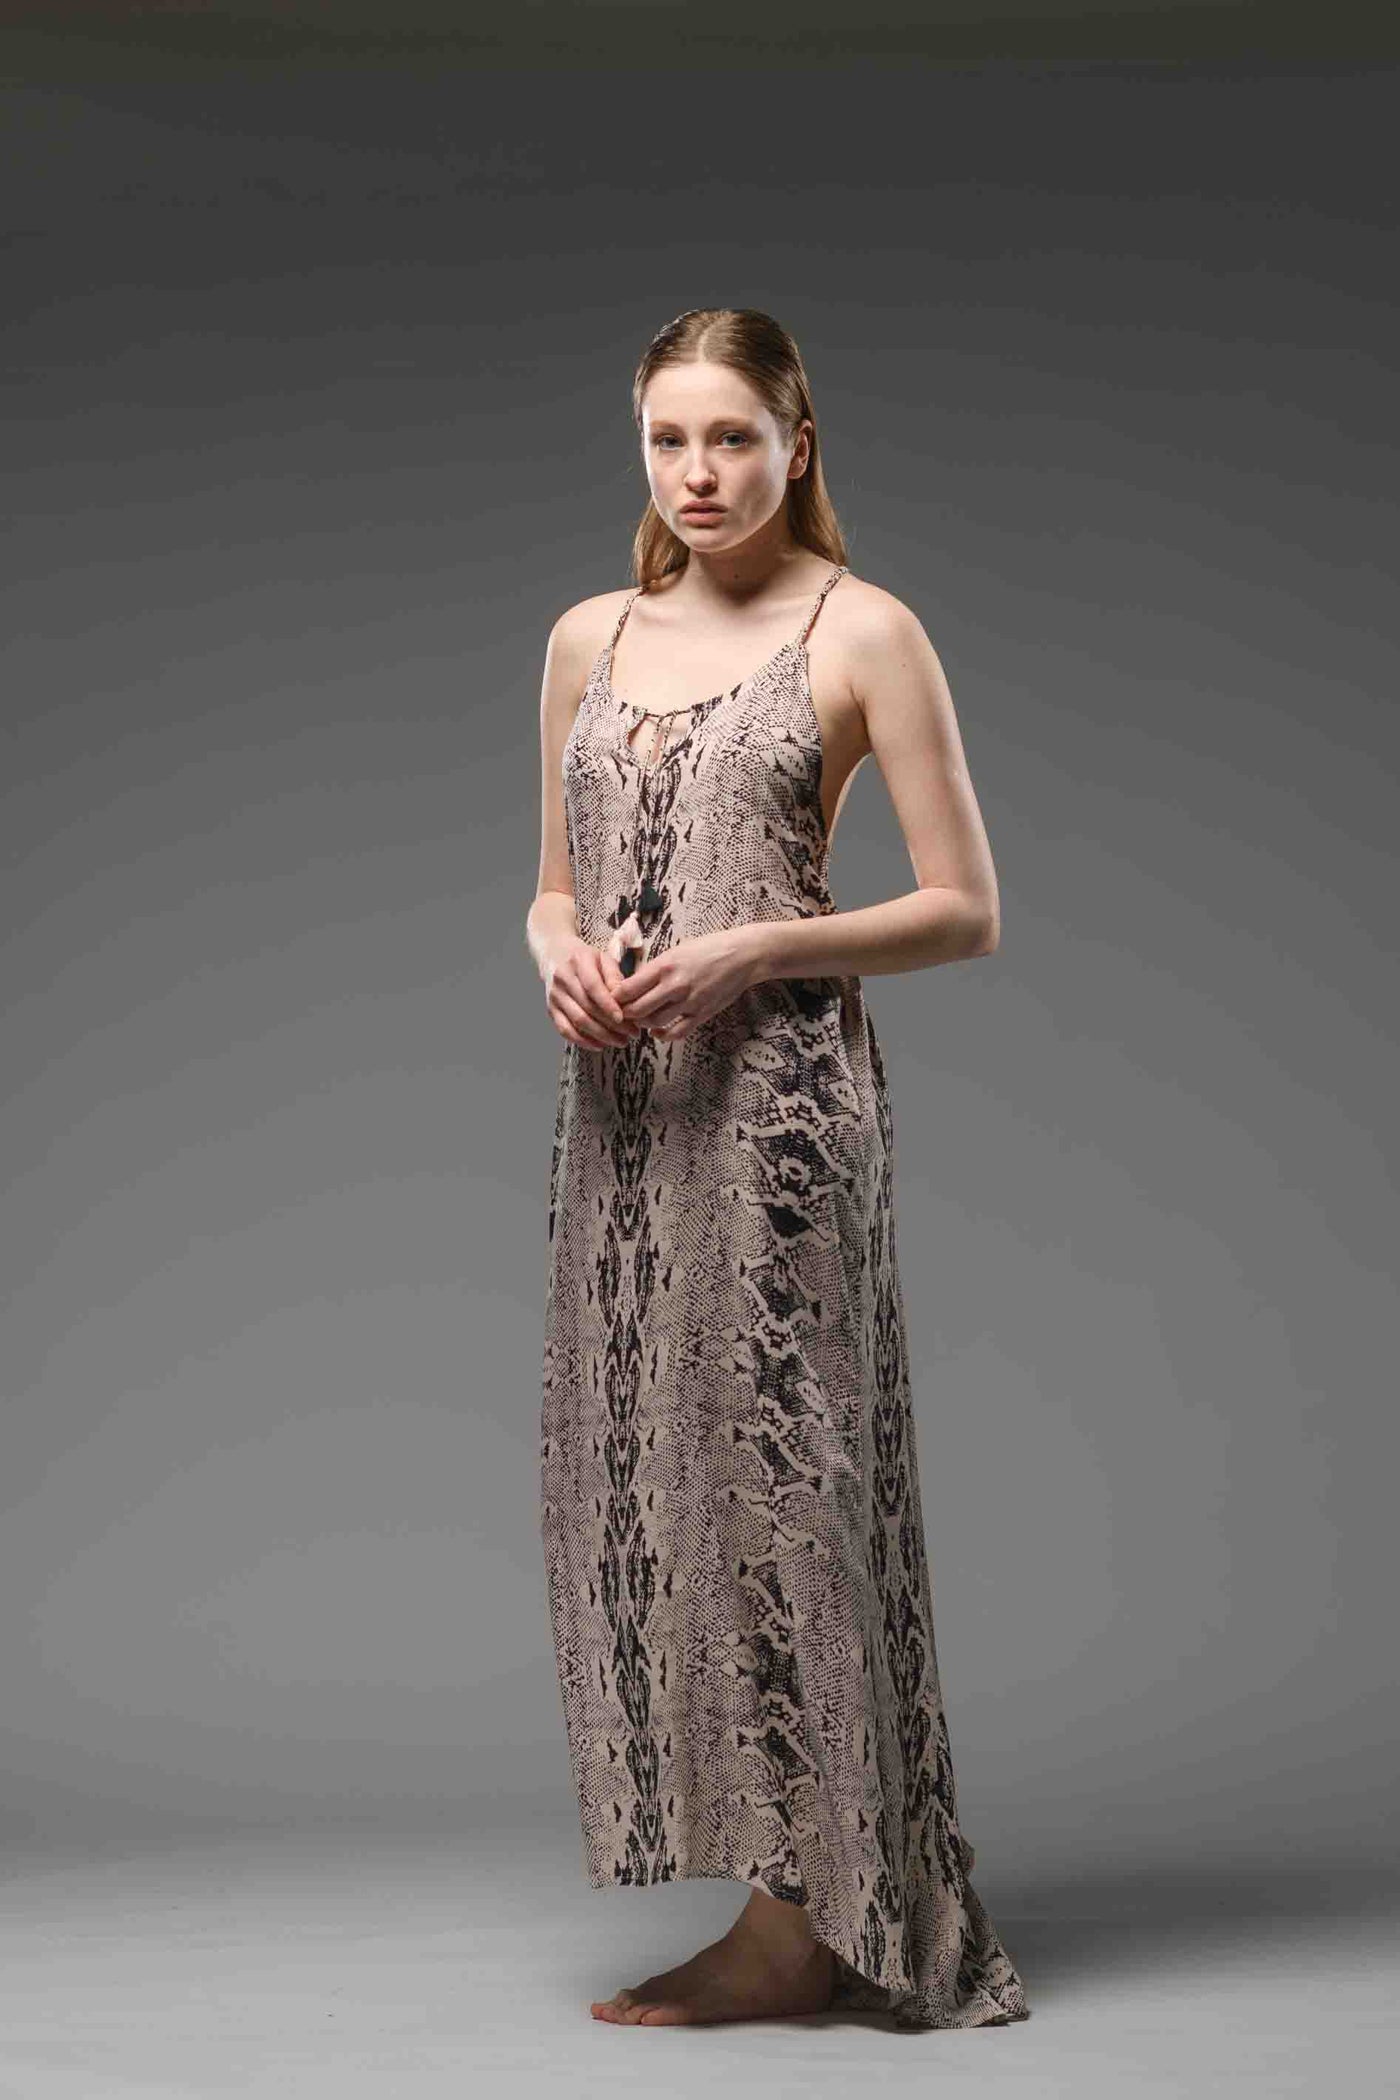  Elegant resort wear python print soft rayon dress. Hand knitted braided cord ropes made of the same fabric, create a special detail net in the back.